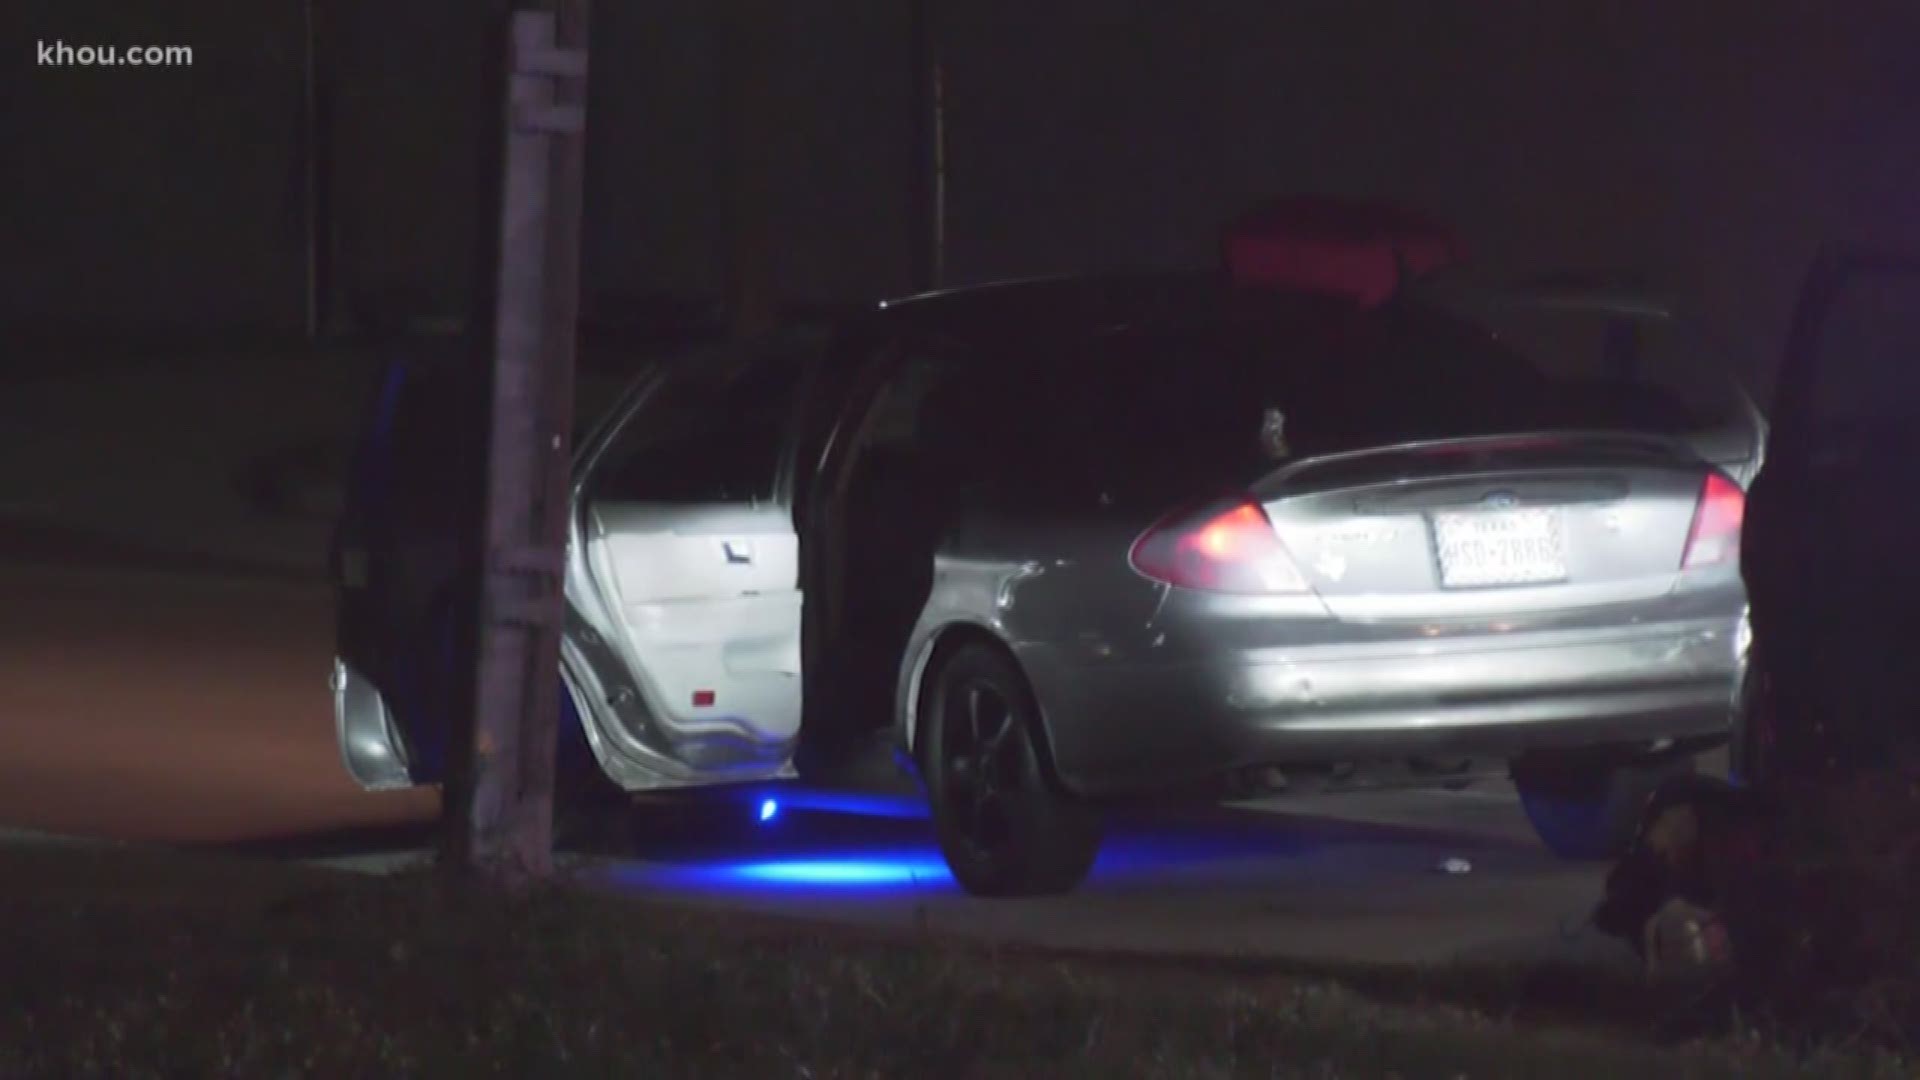 The chase ended in a crash overnight. KHOU 11's Janel Forte reports.